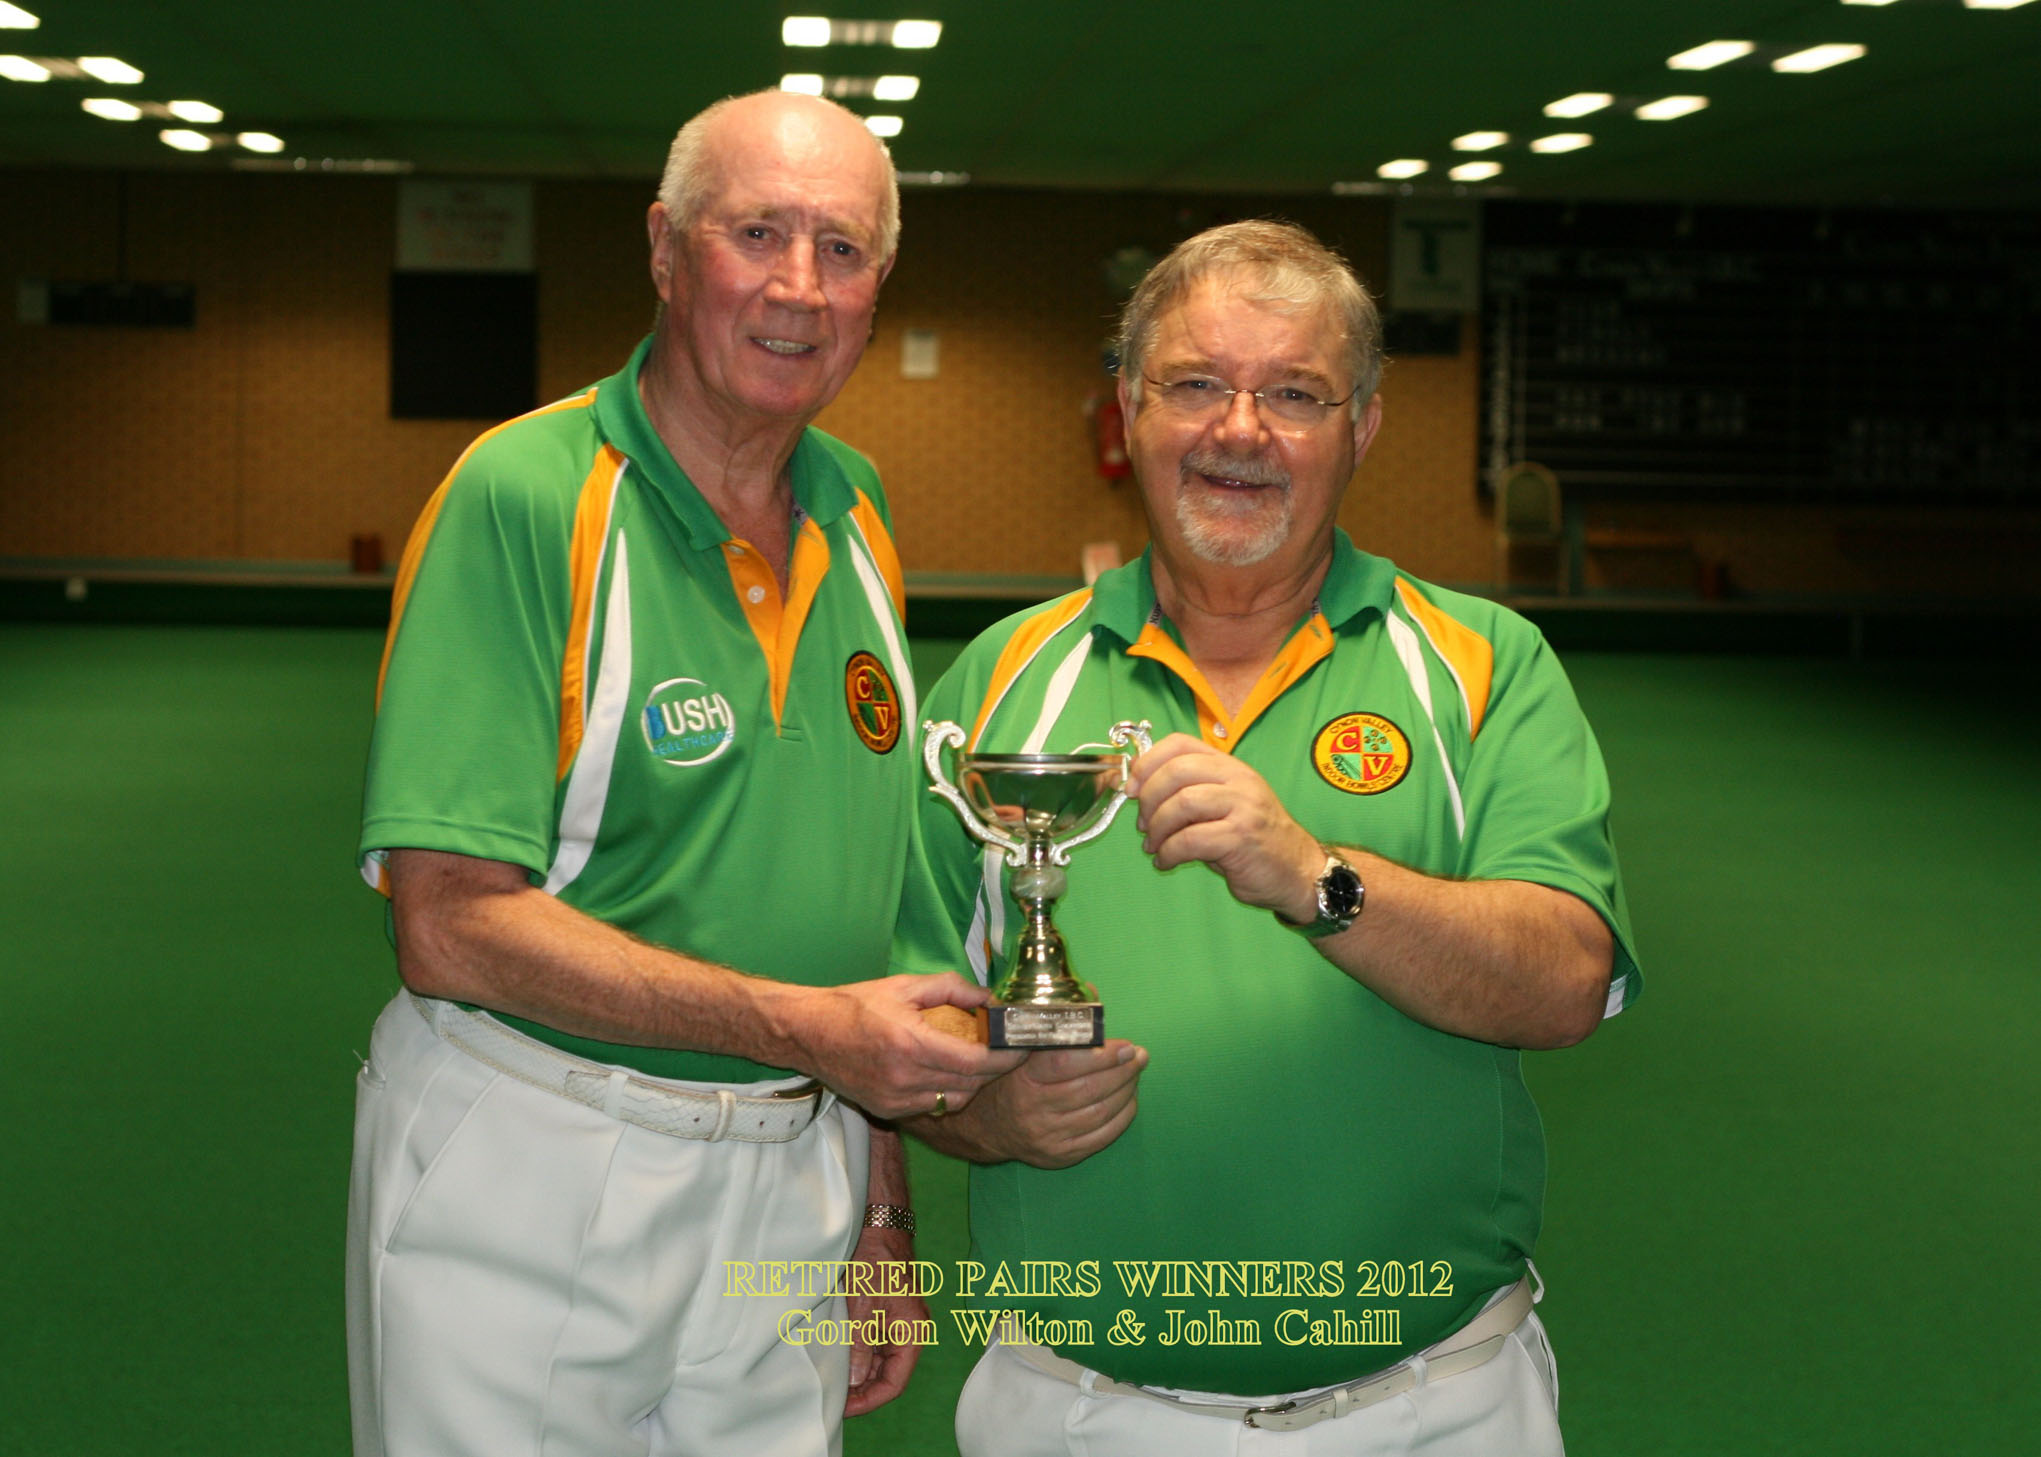 Cynon Valley Indoor Bowls Centre & Woods Restaurant and Carvery